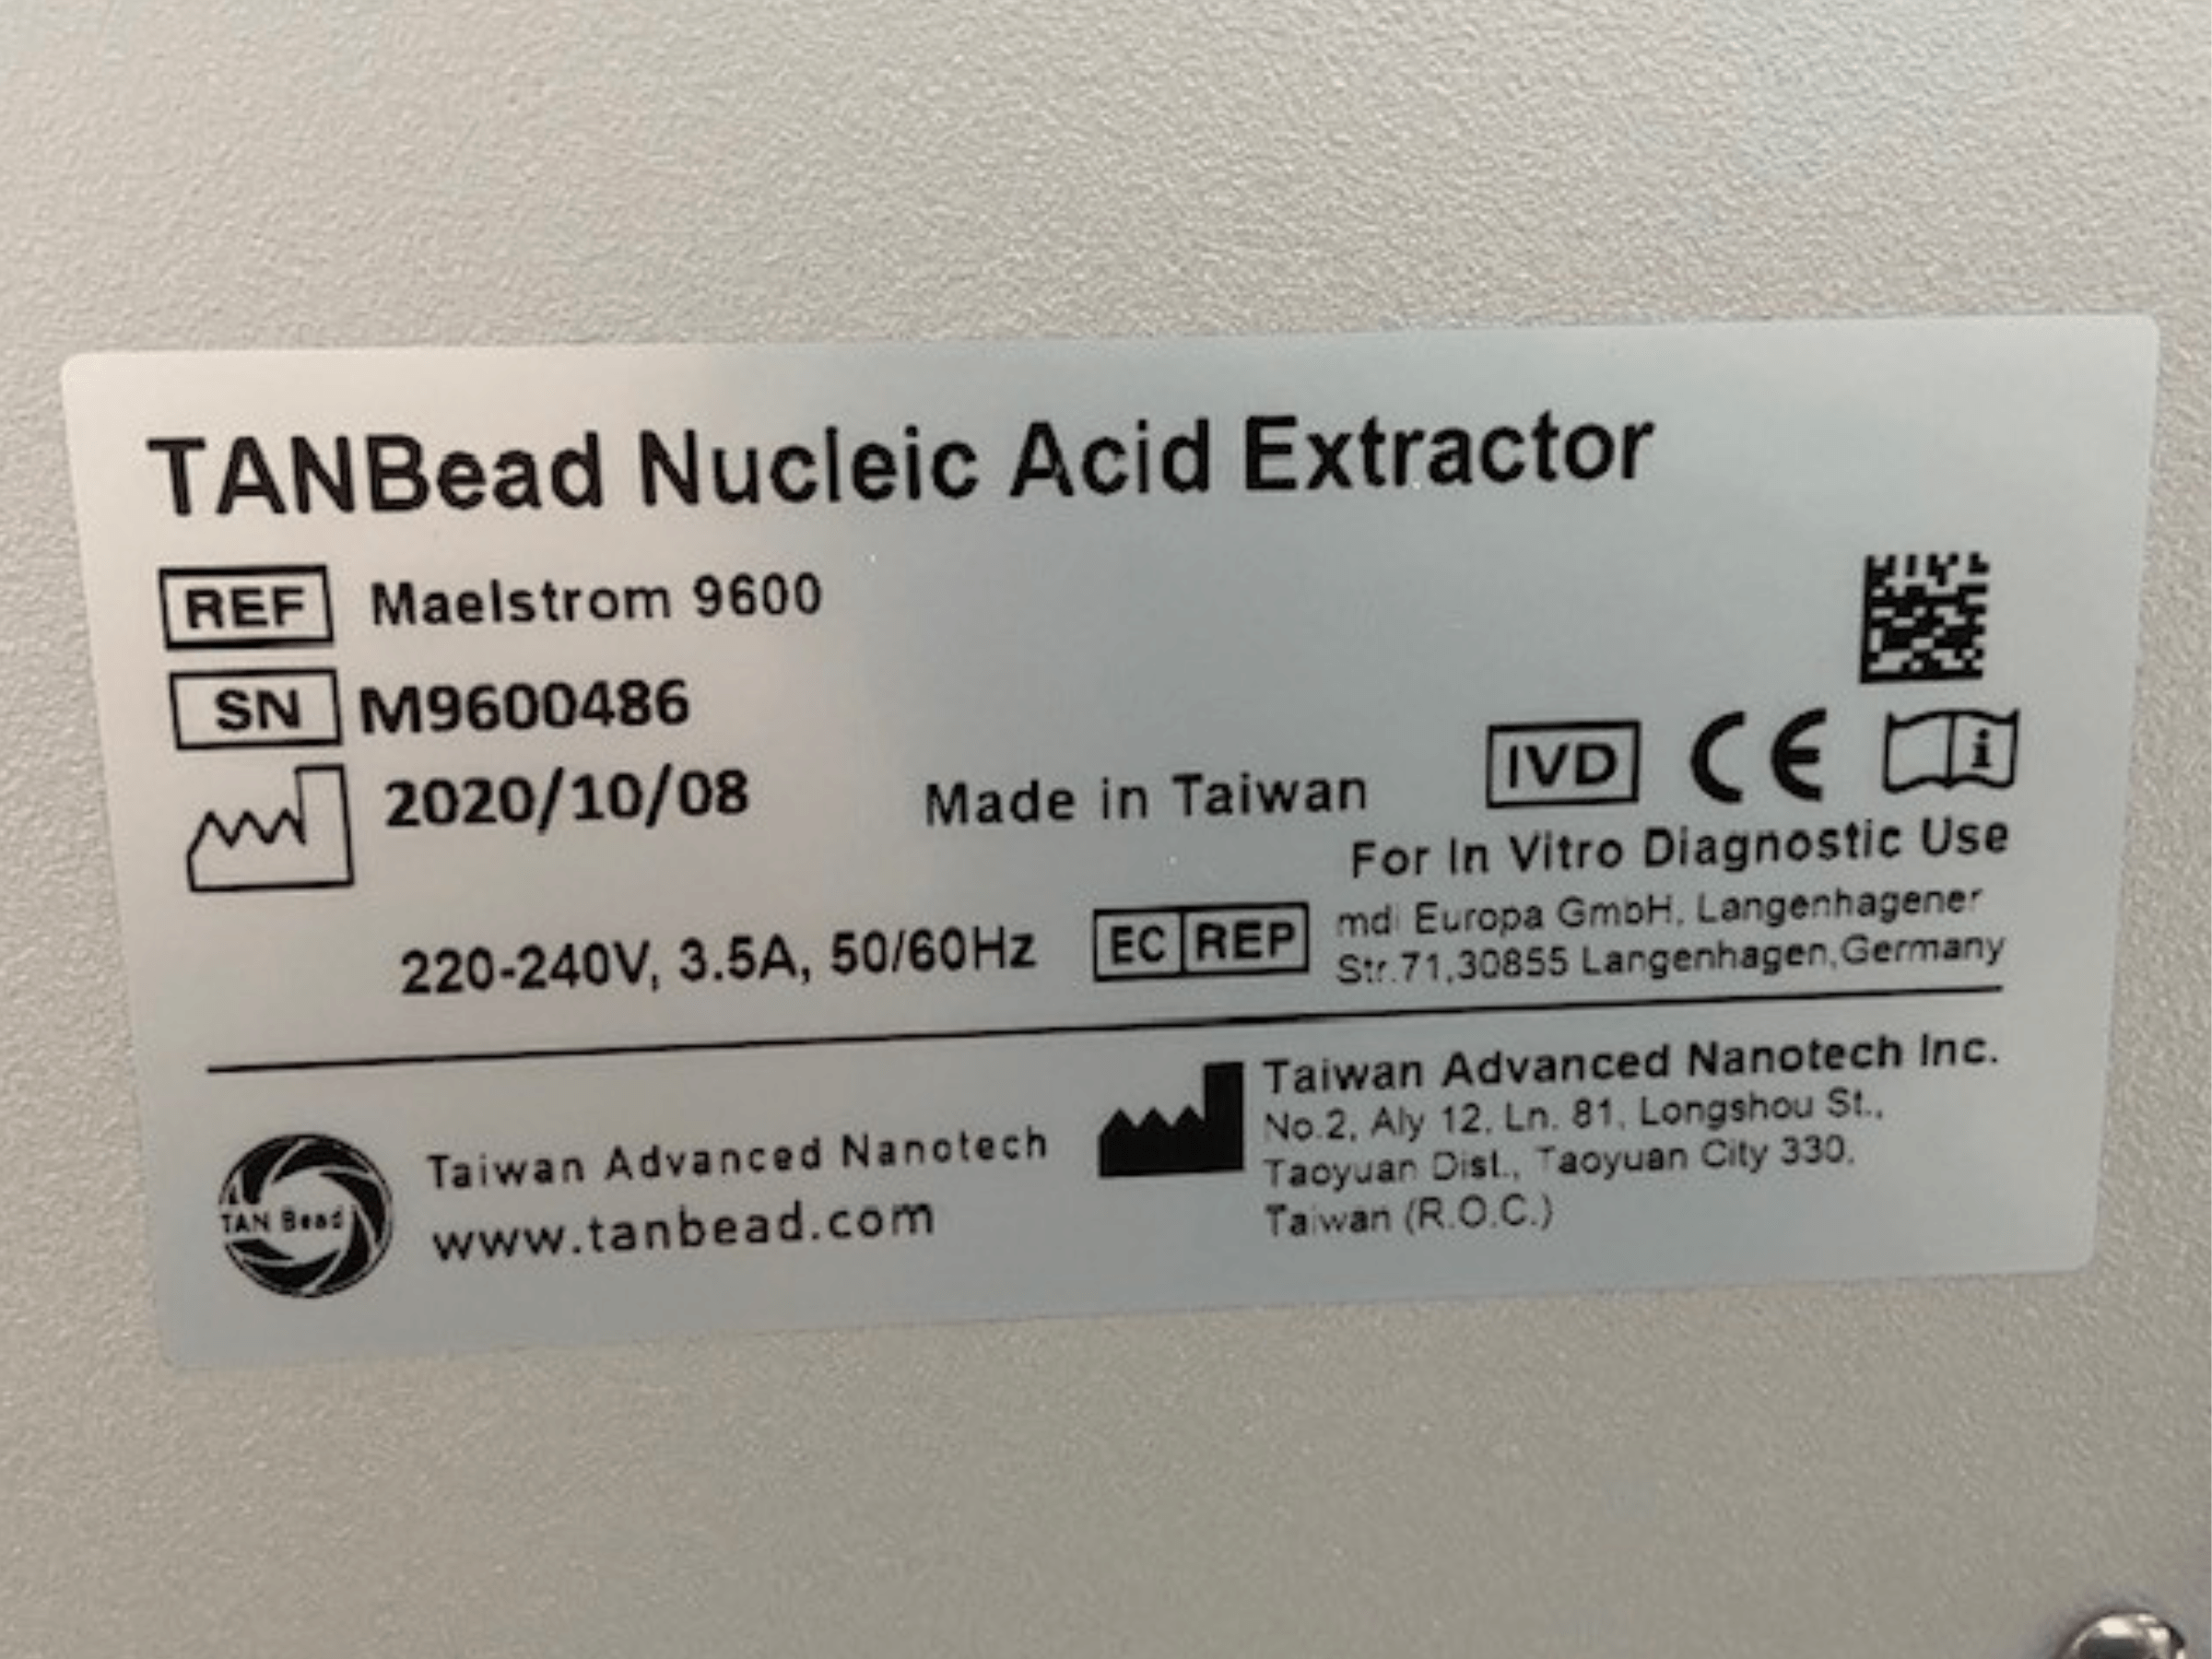 Tanbead Nucleic Acid Extractor Maelstrom 9600